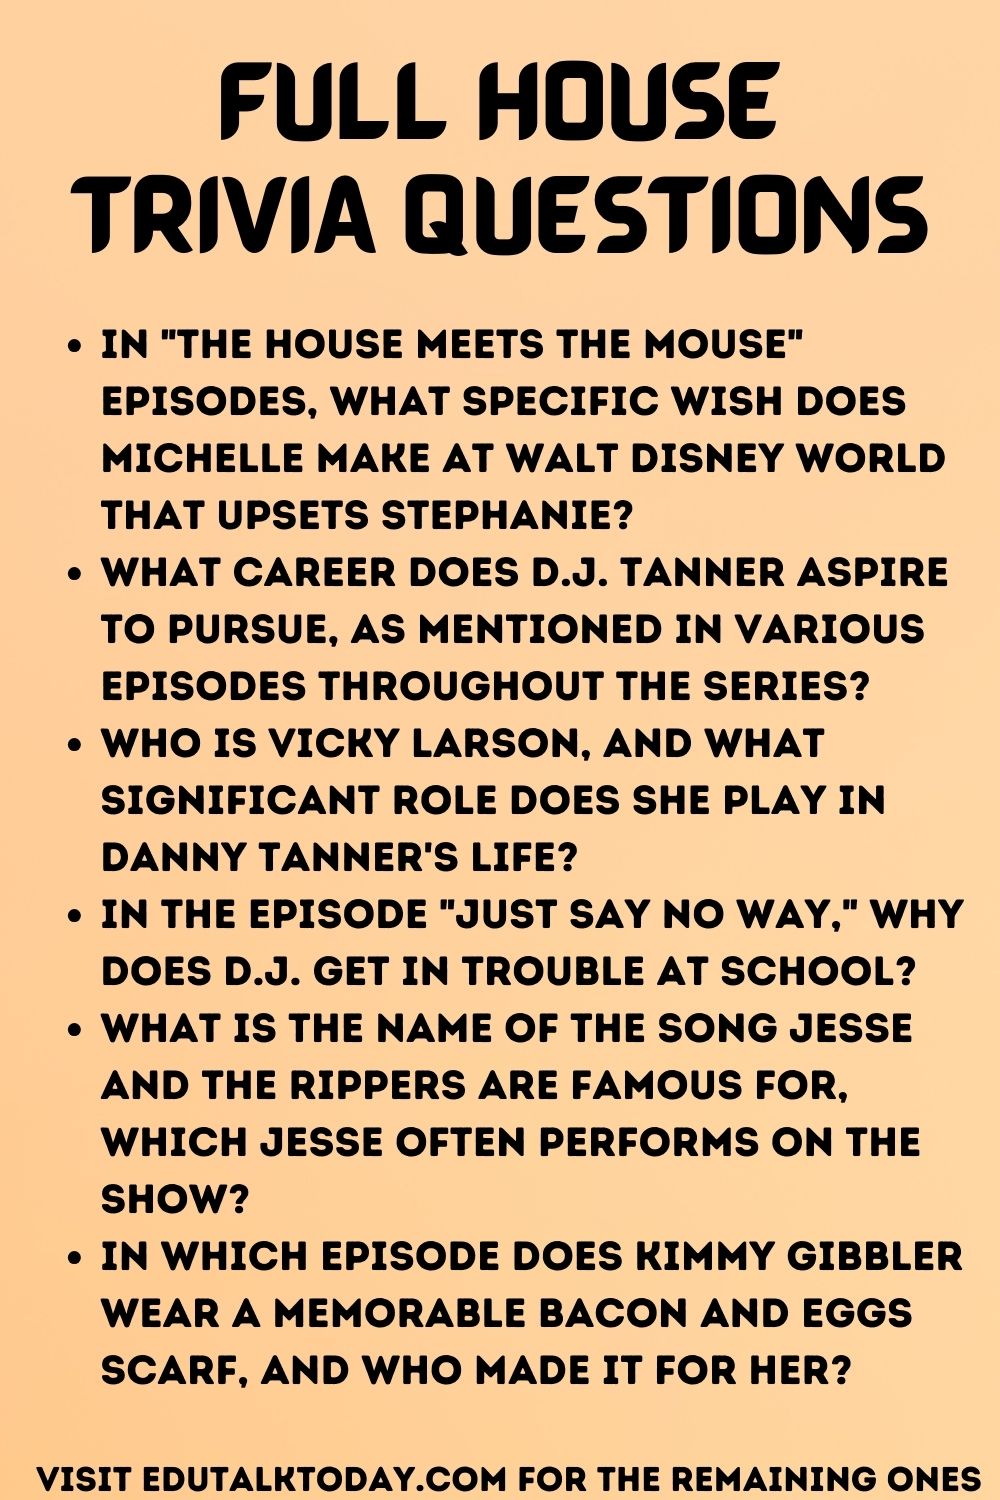 Full House Trivia Questions